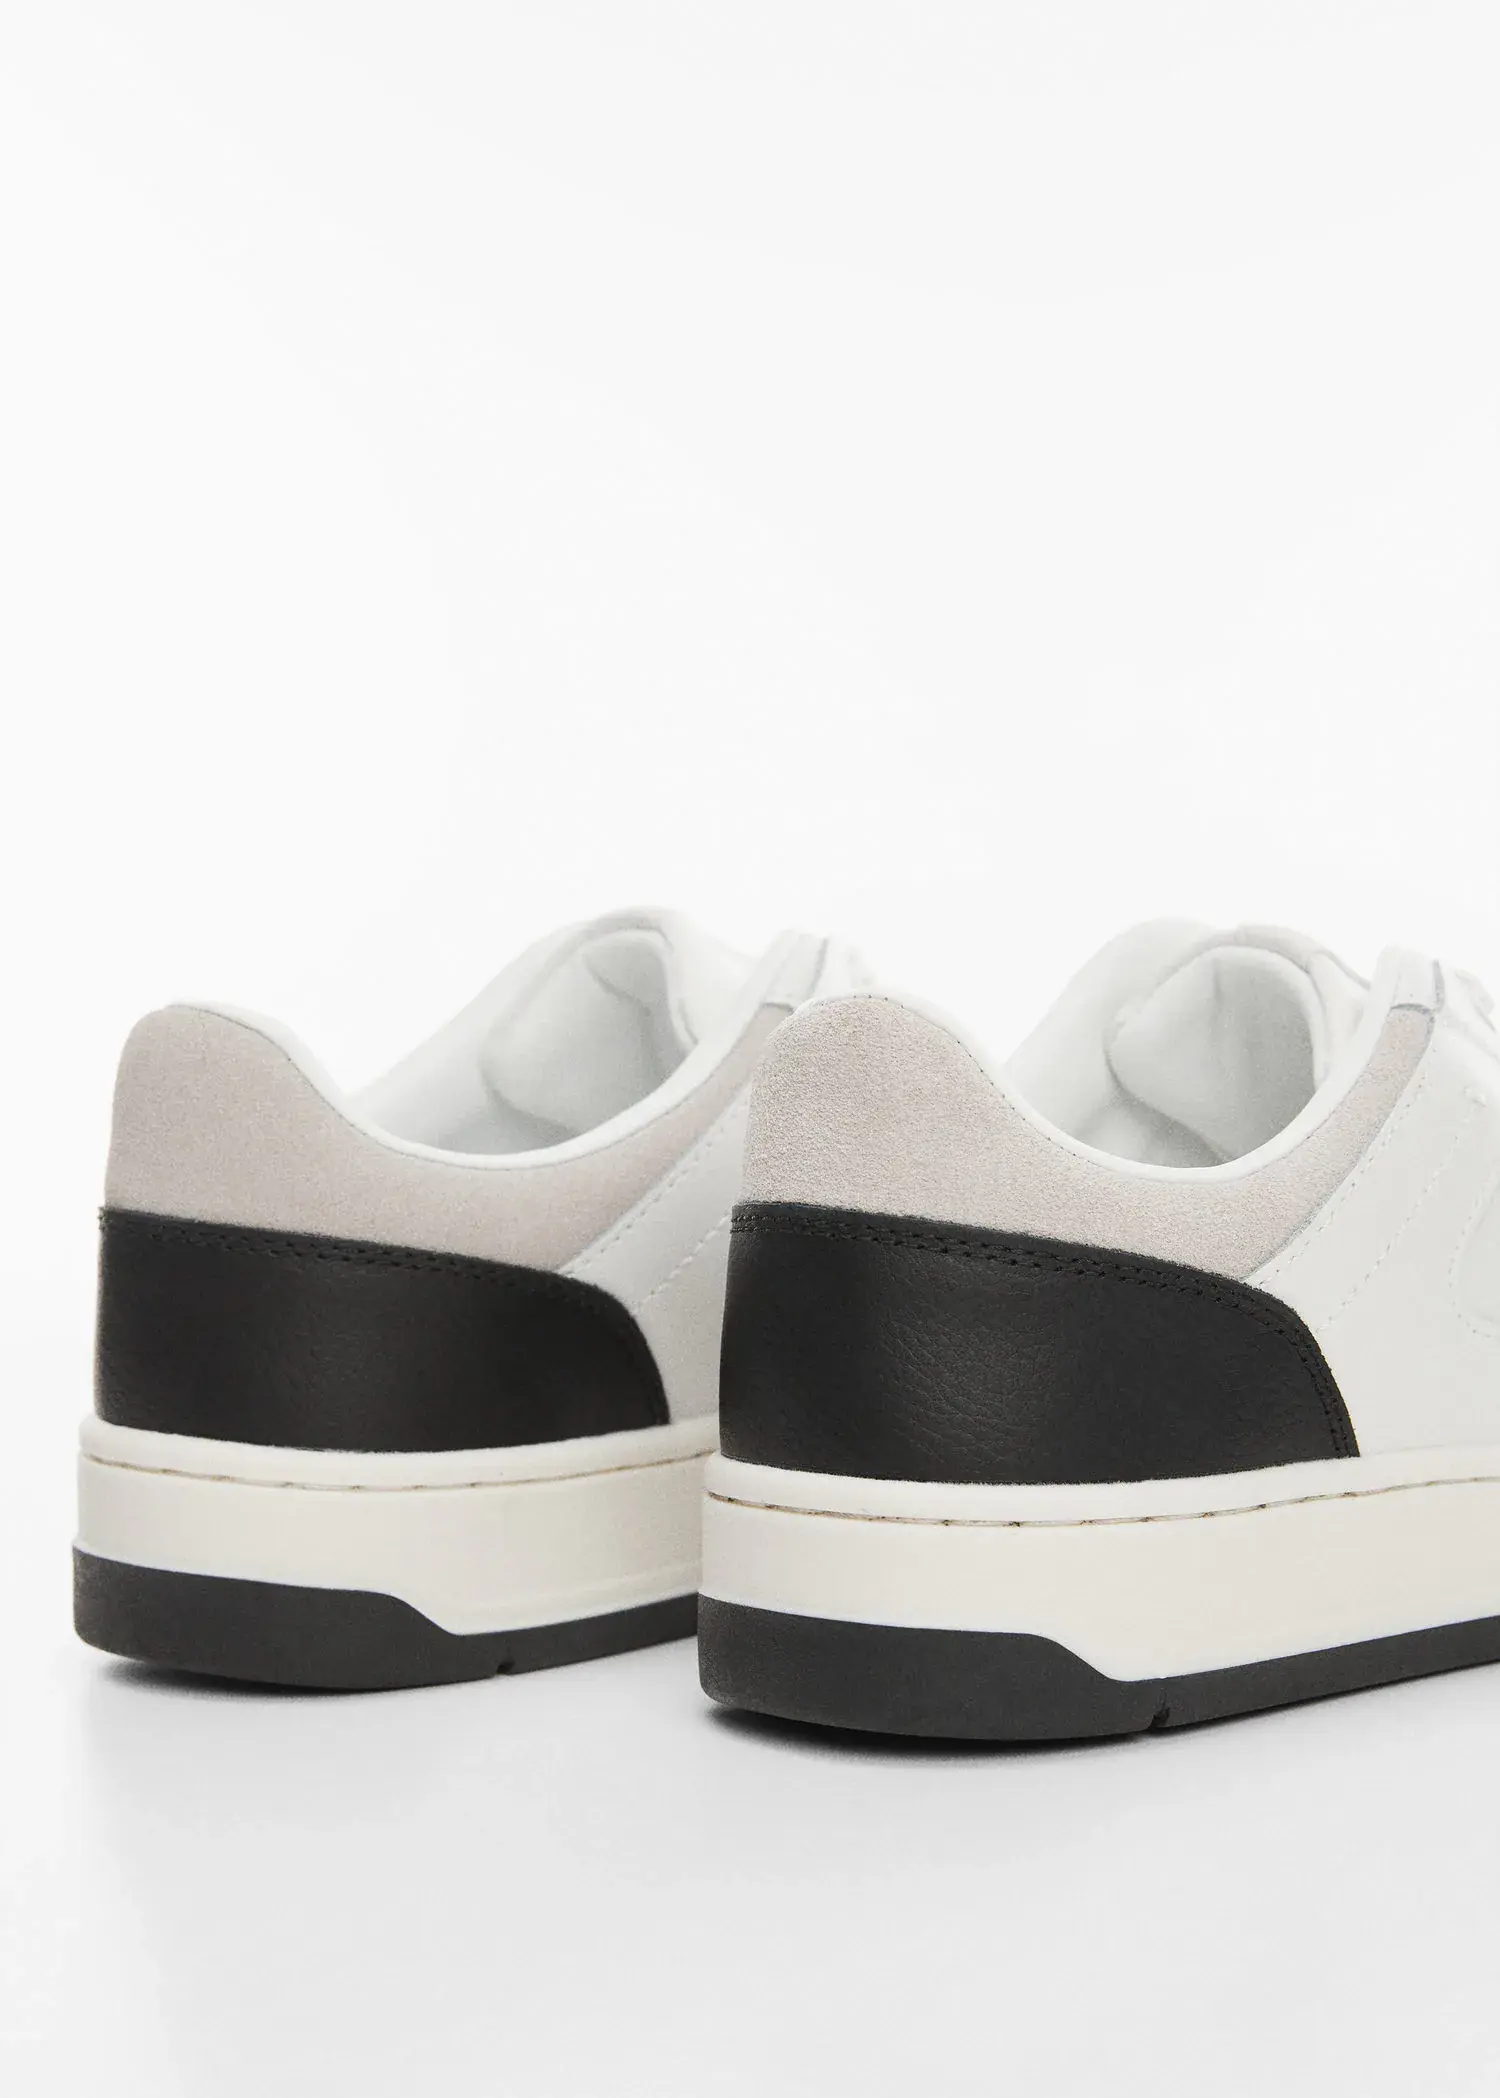 Mango Combined leather trainers. 3